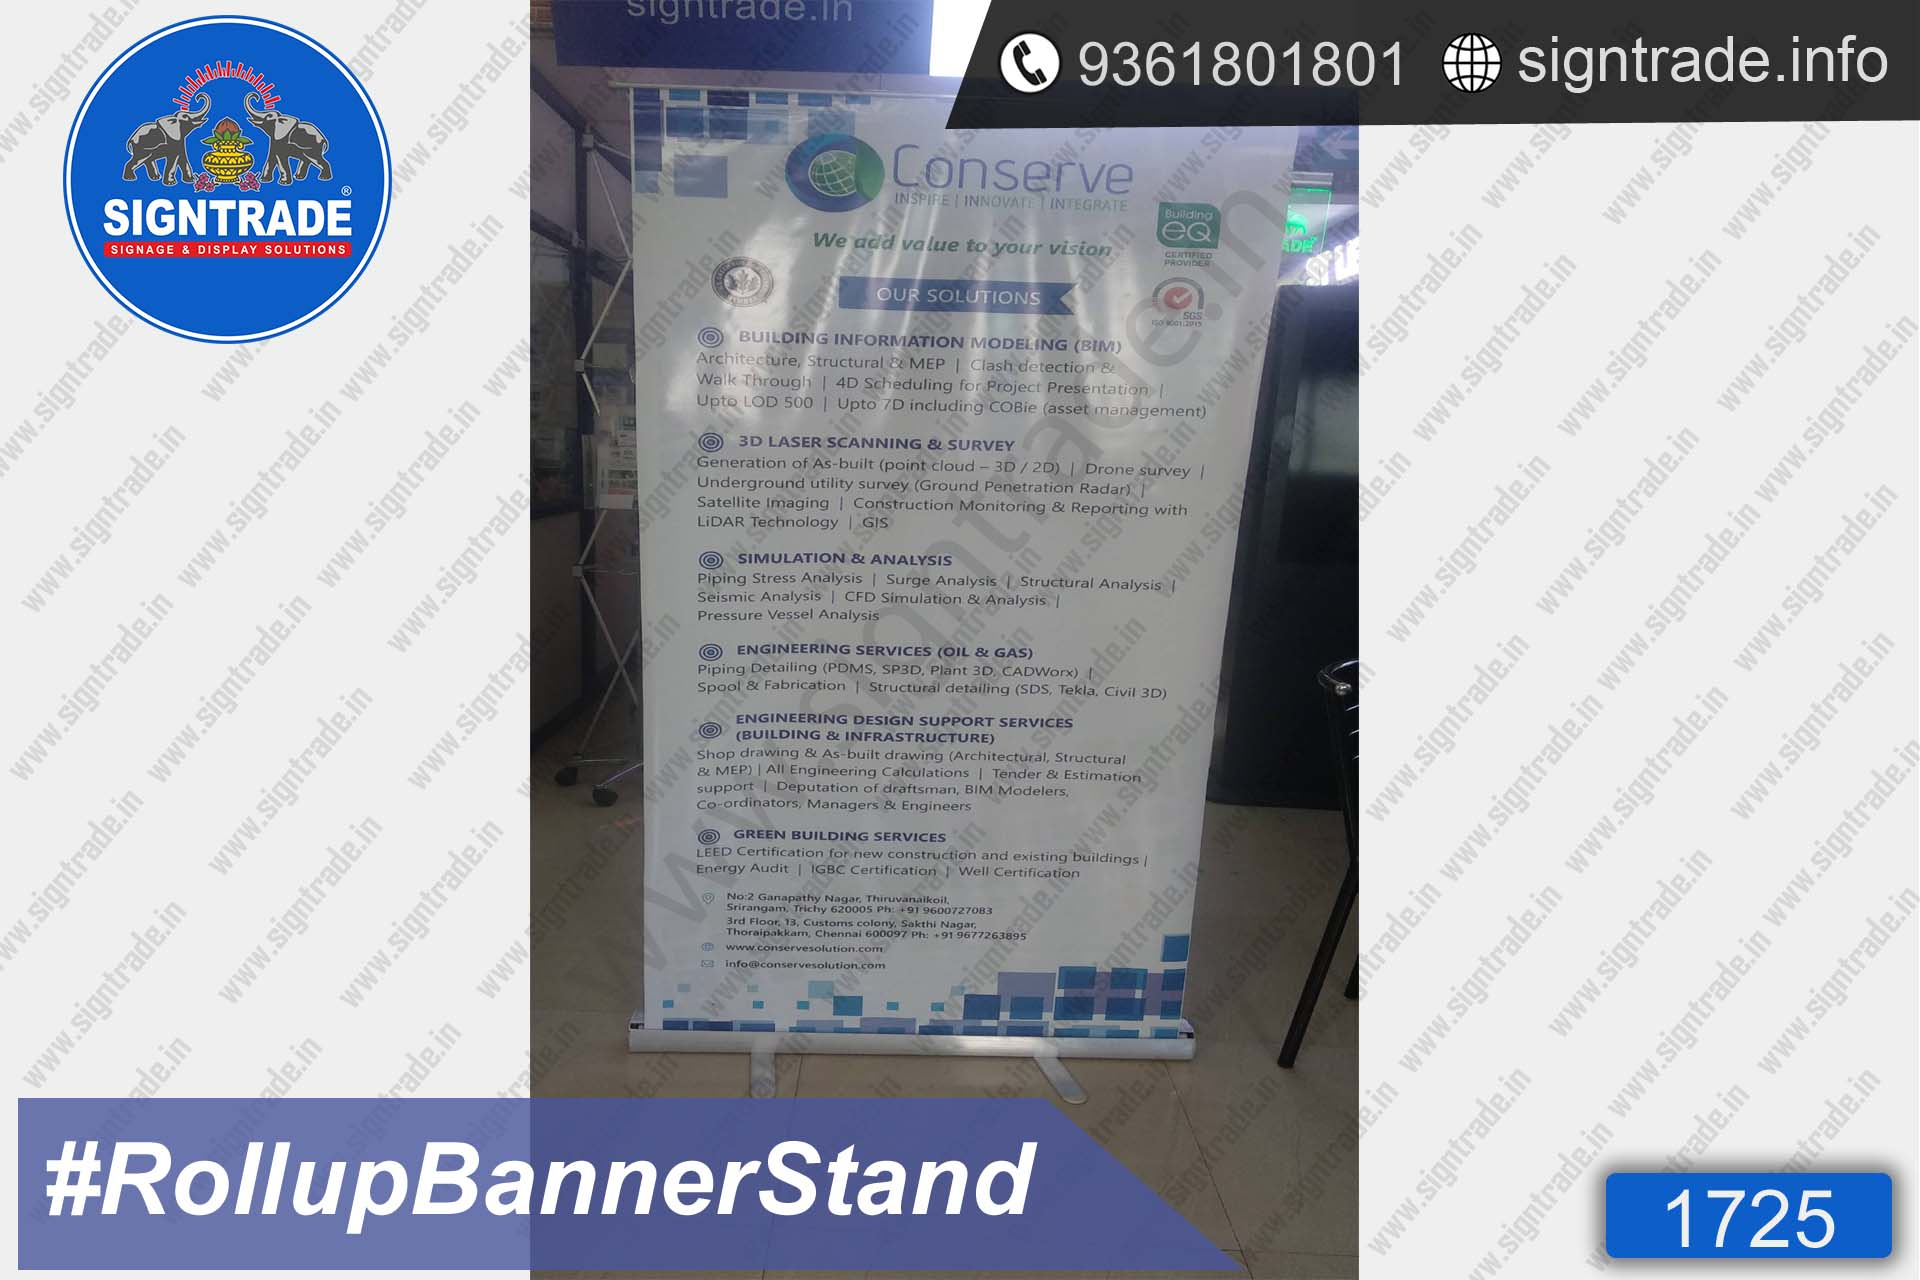 Conserve rollupbanner stand